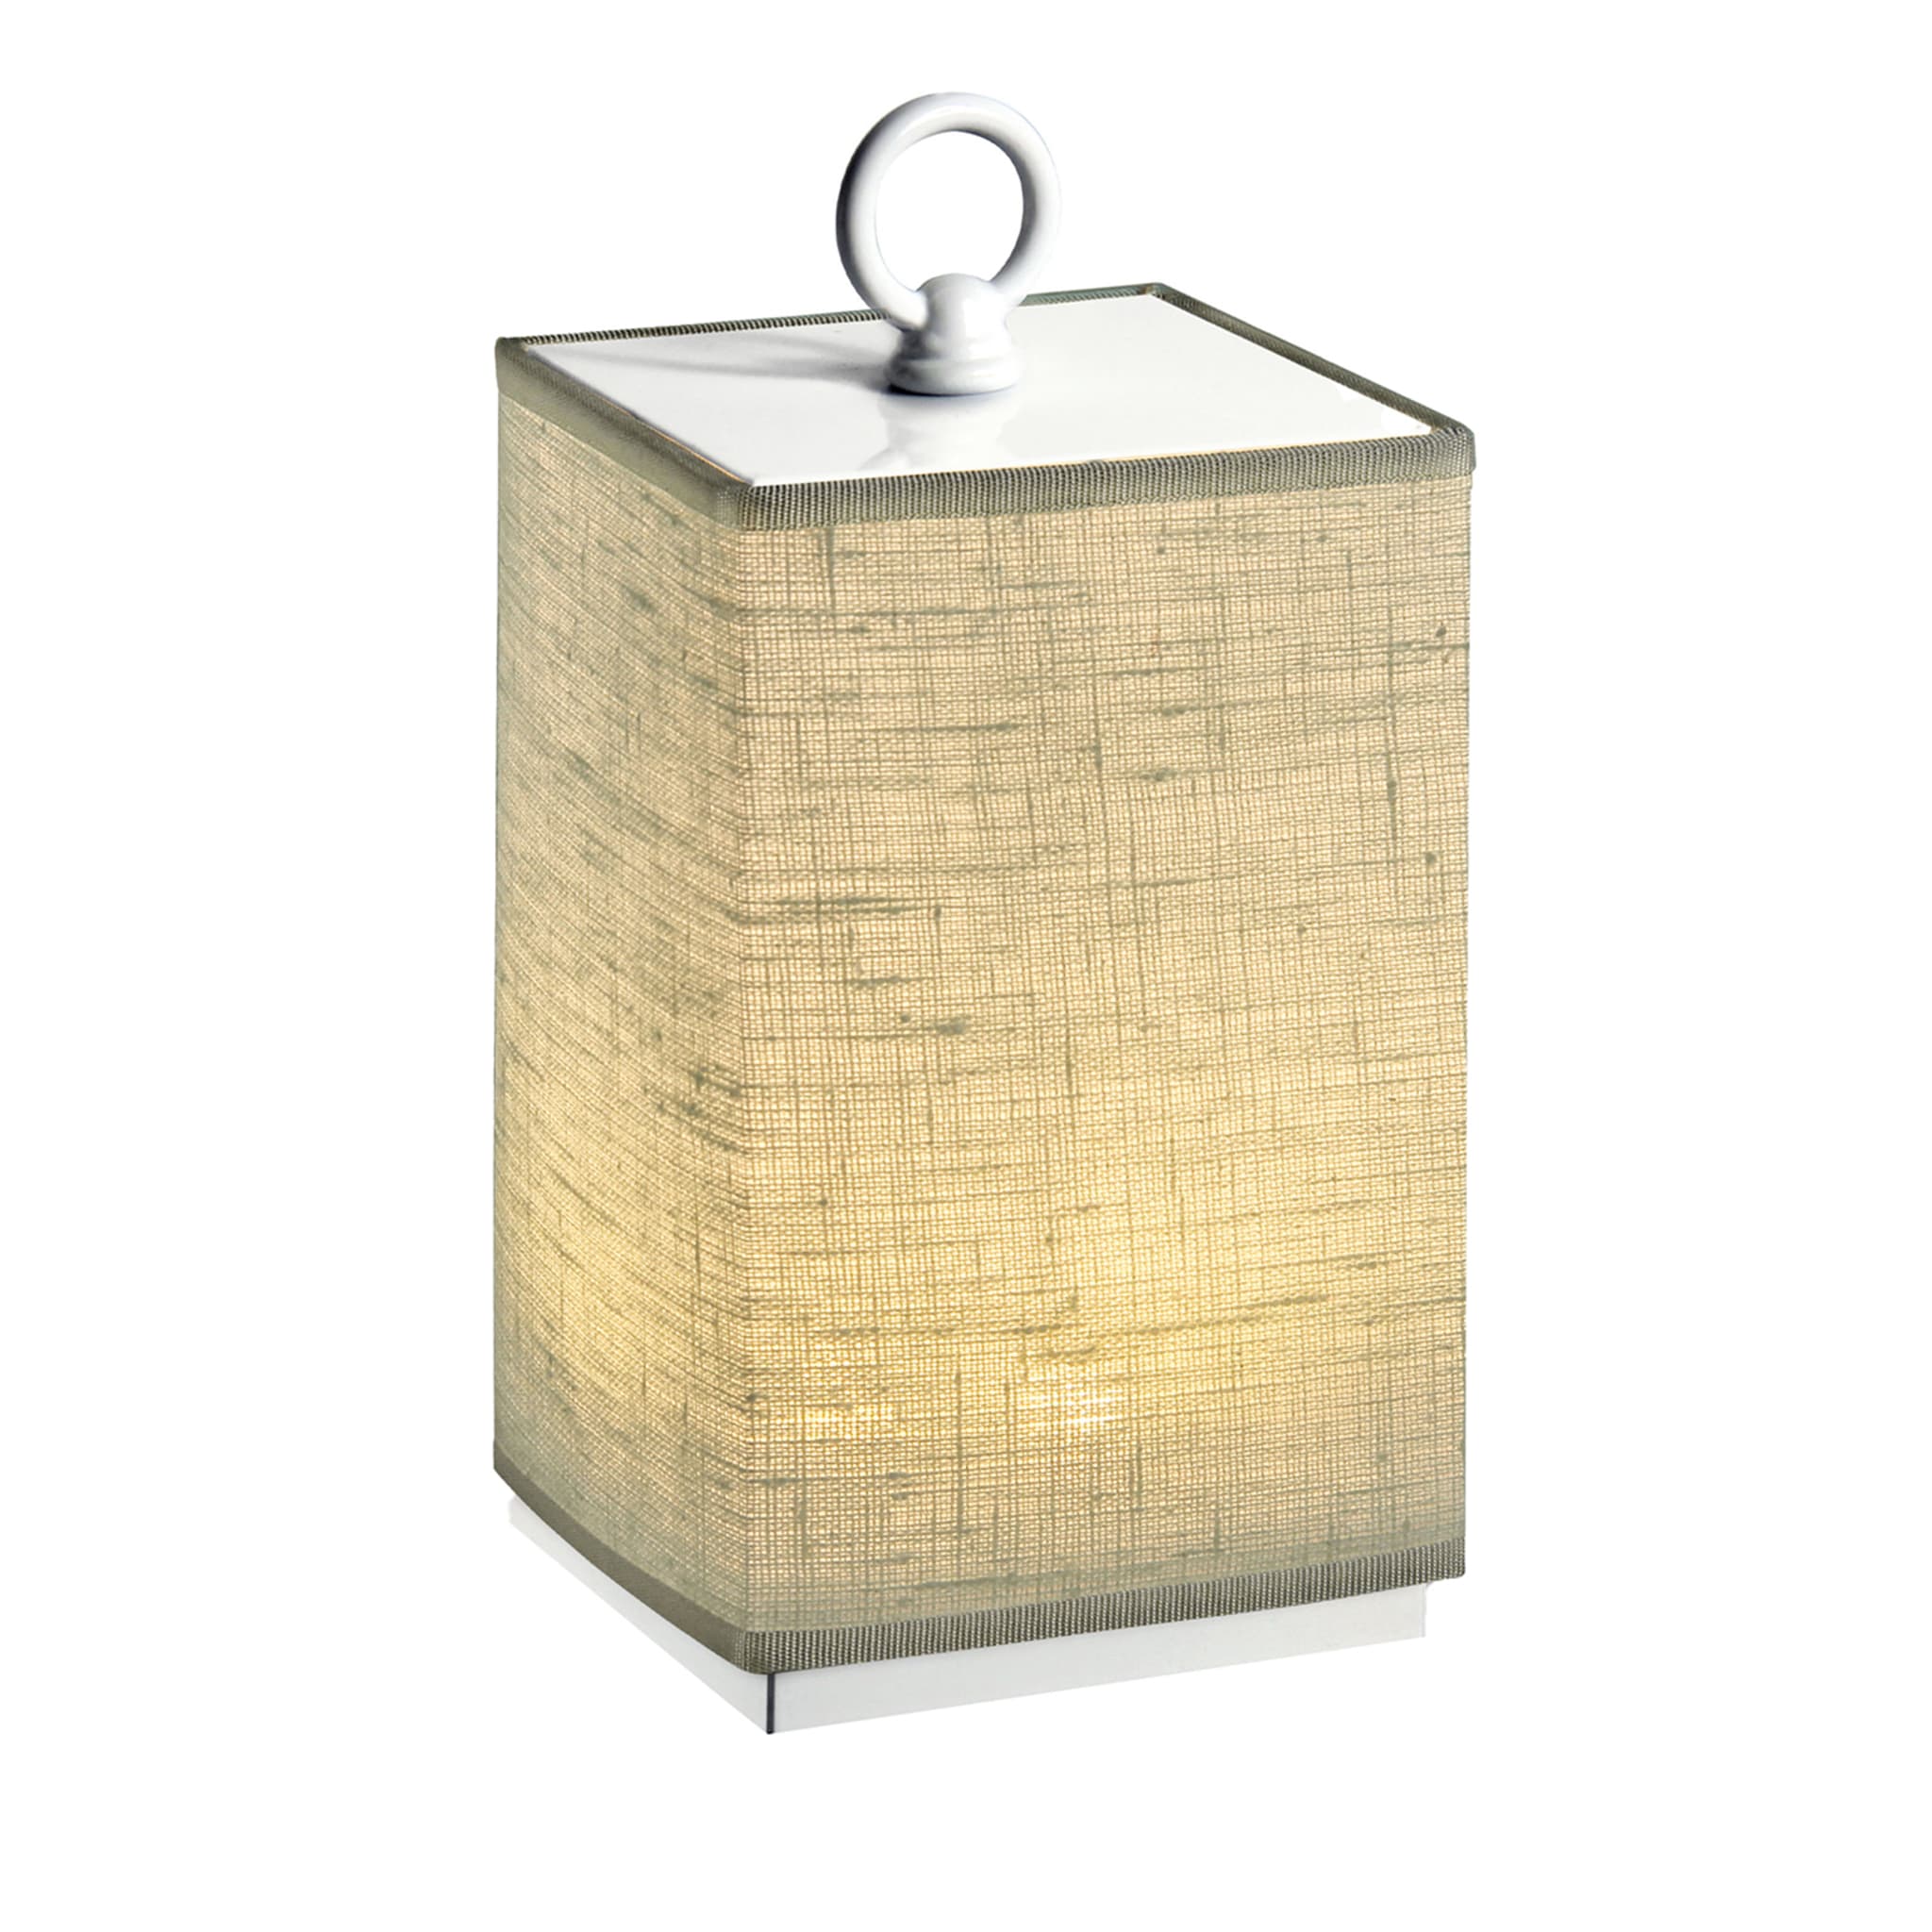 Starlet Q White Table Lamp by Stefano Tabarin - Main view